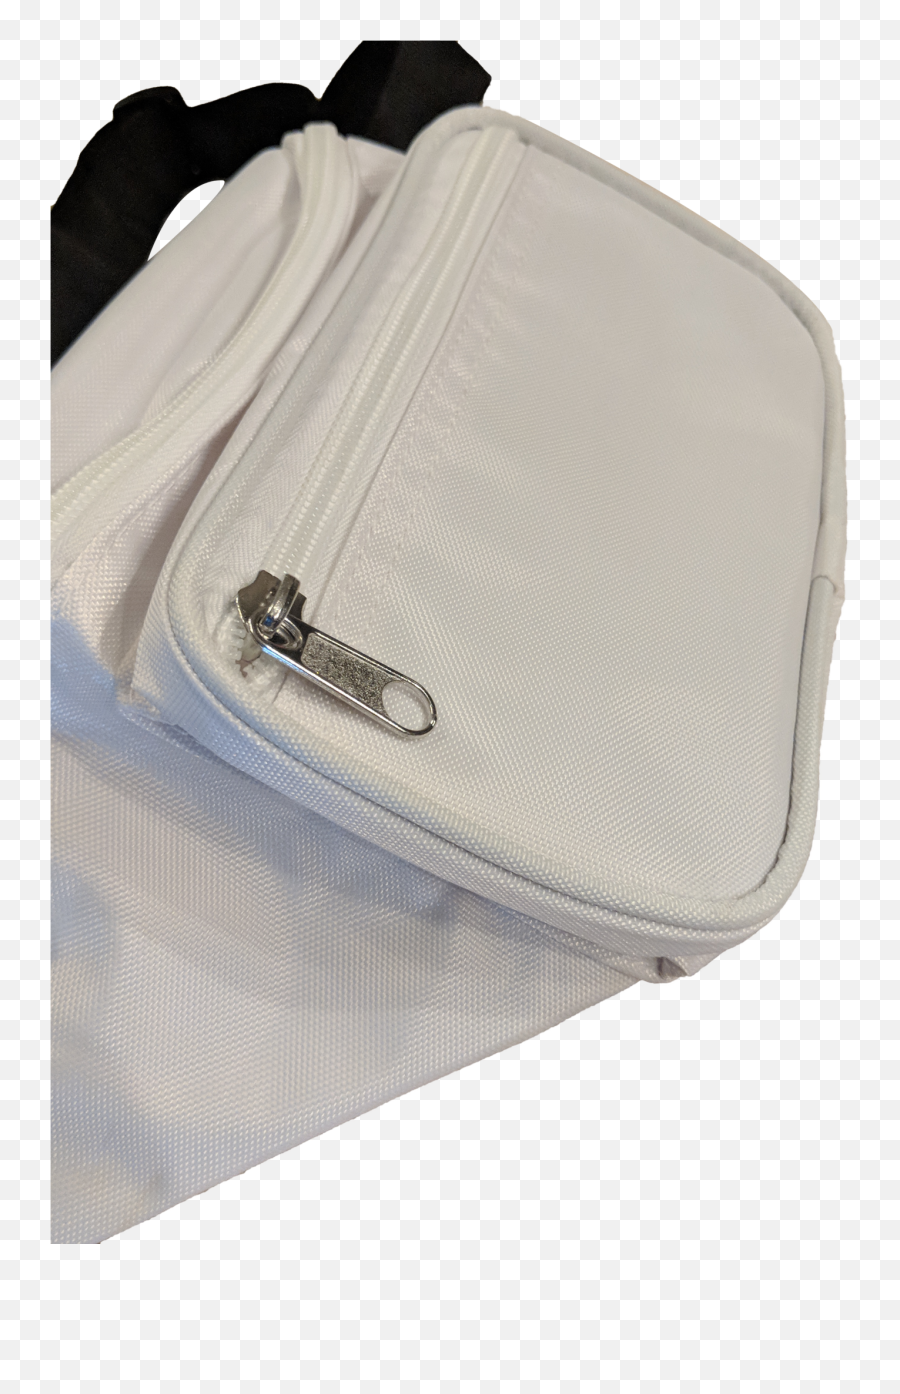 Image Into Gallery Viewer - Briefcase Png,Fanny Pack Png